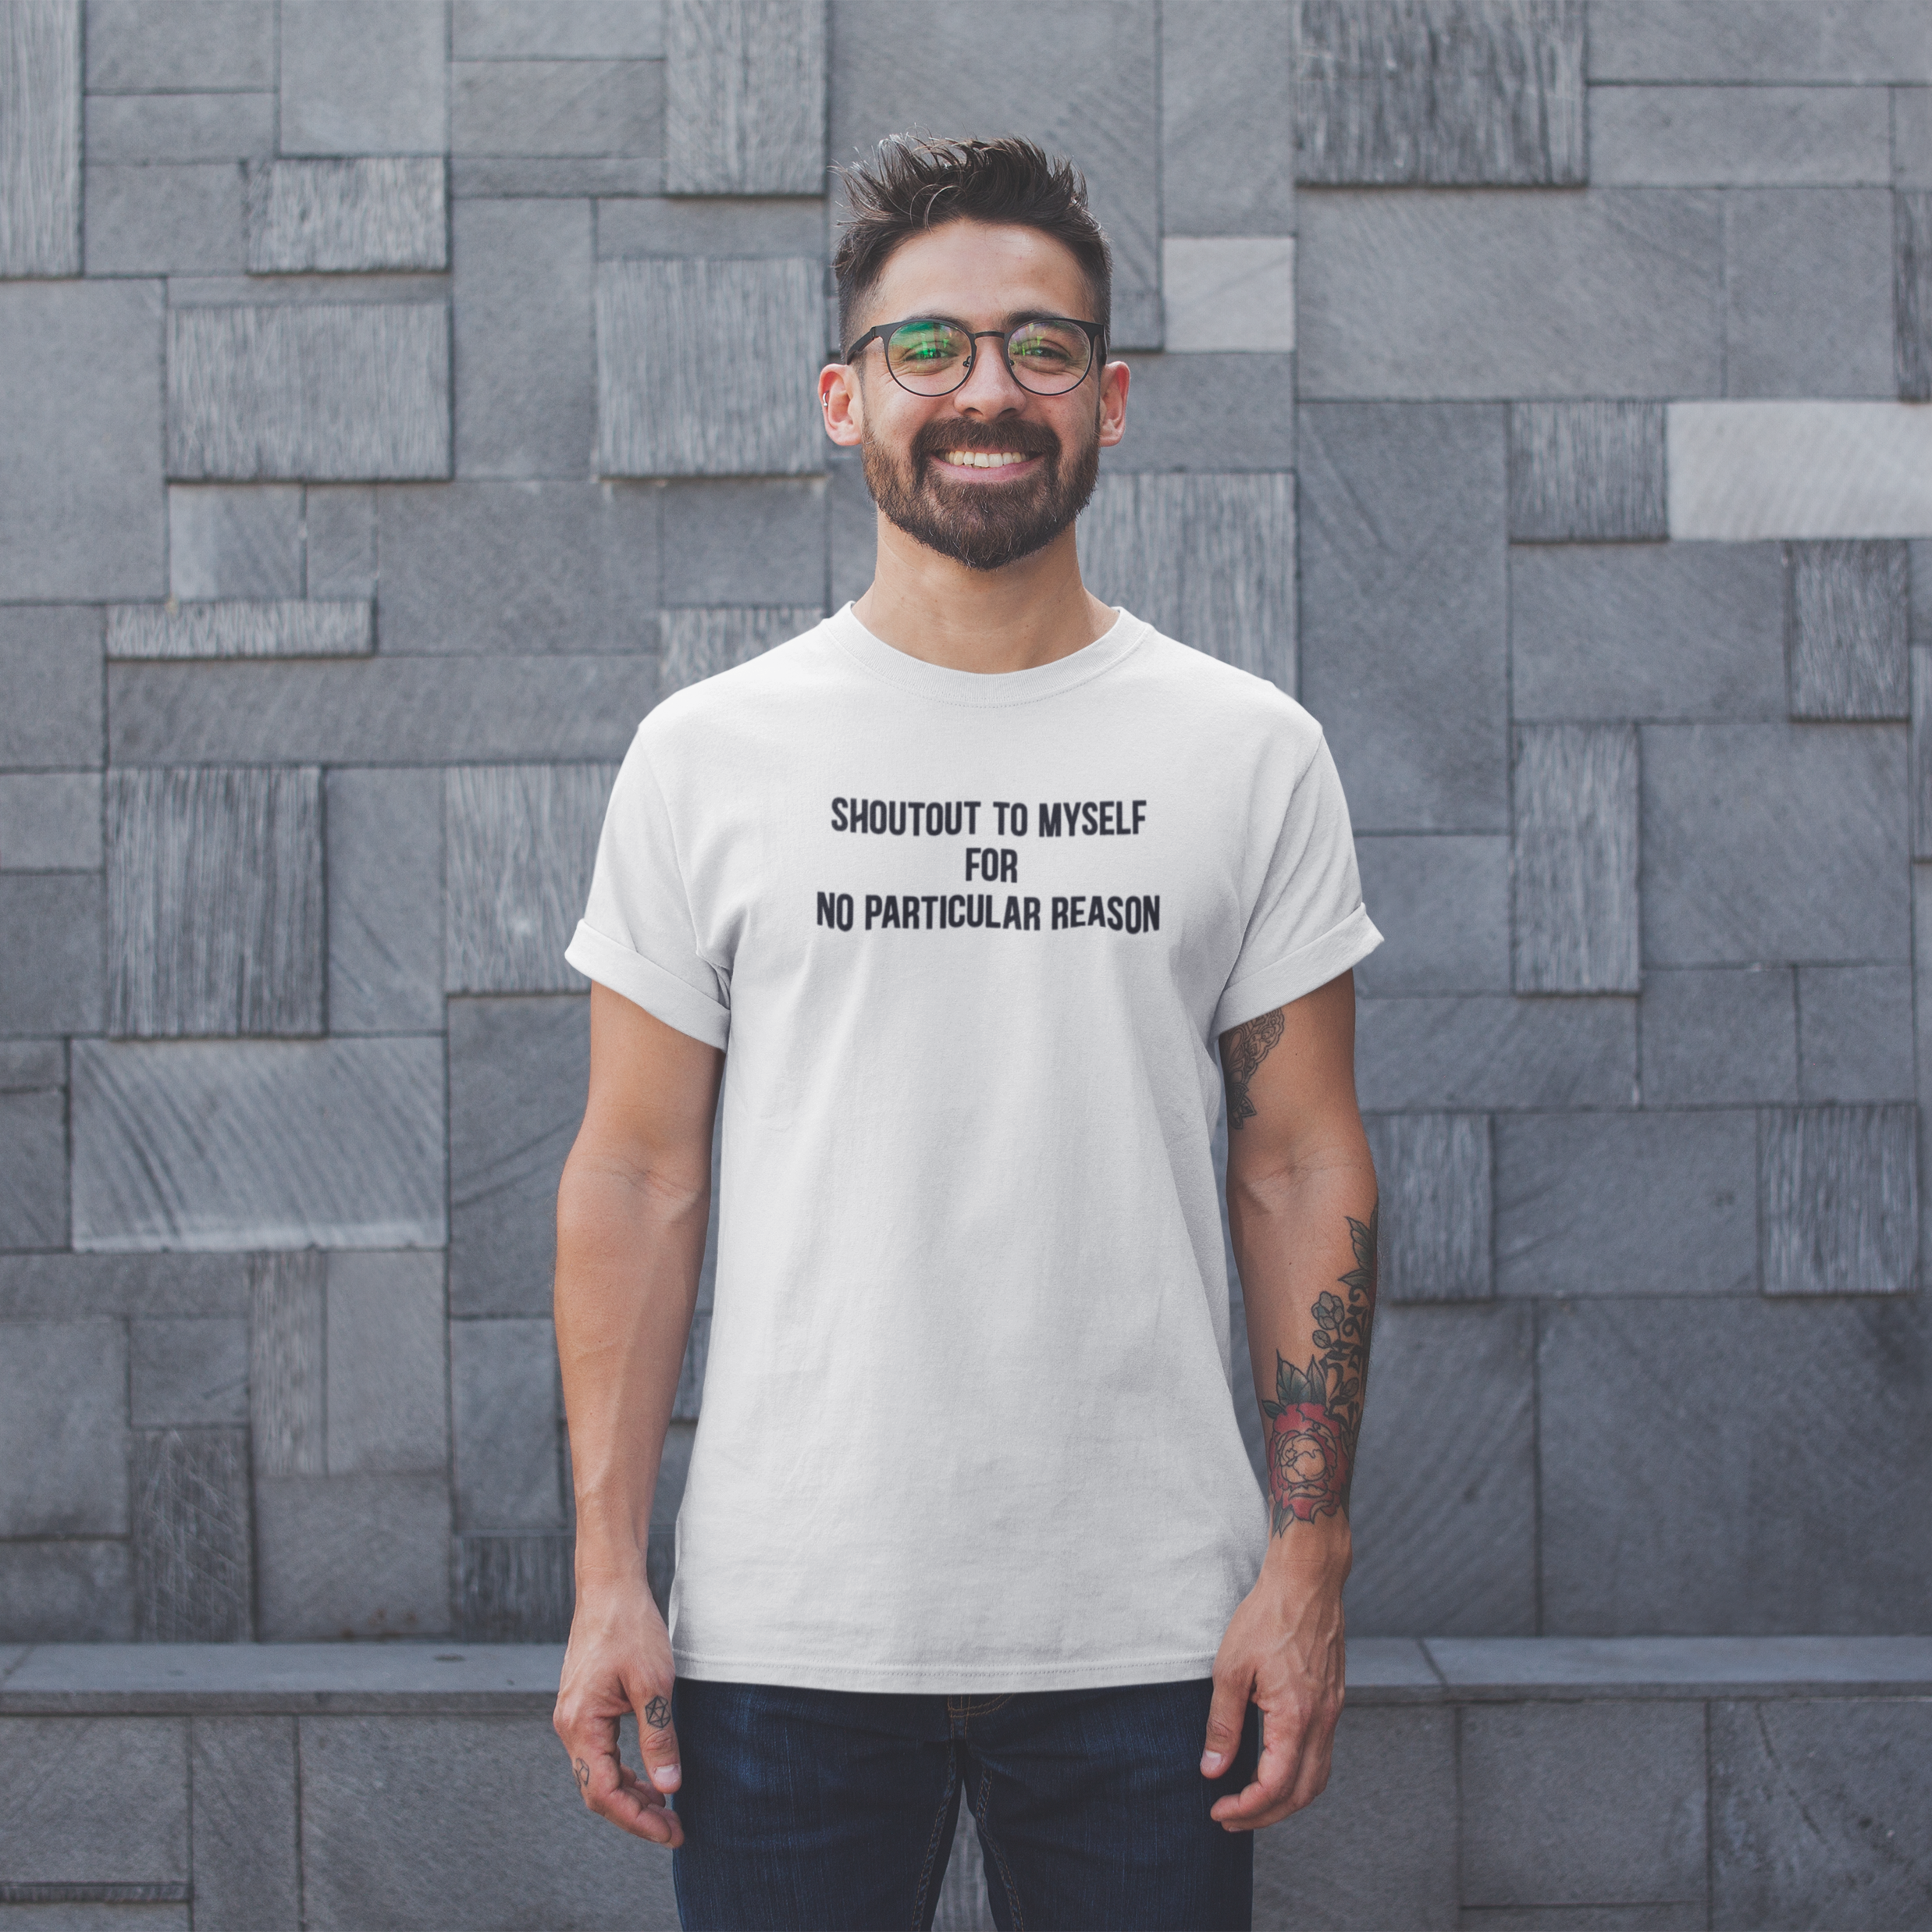 'Shoutout to myself for no particular reason' adult shirt